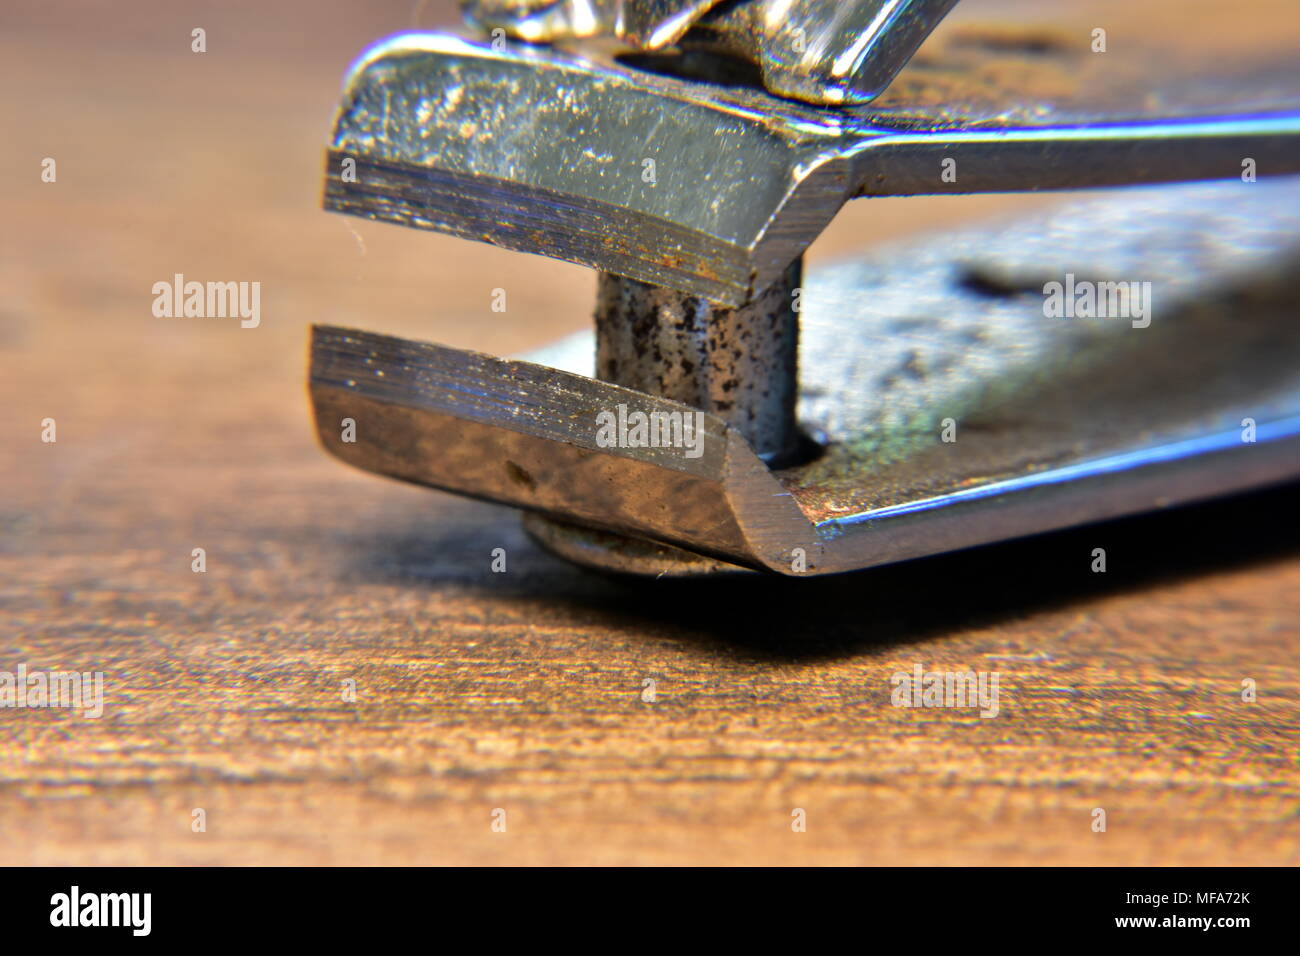 Nail clippers Stock Photo